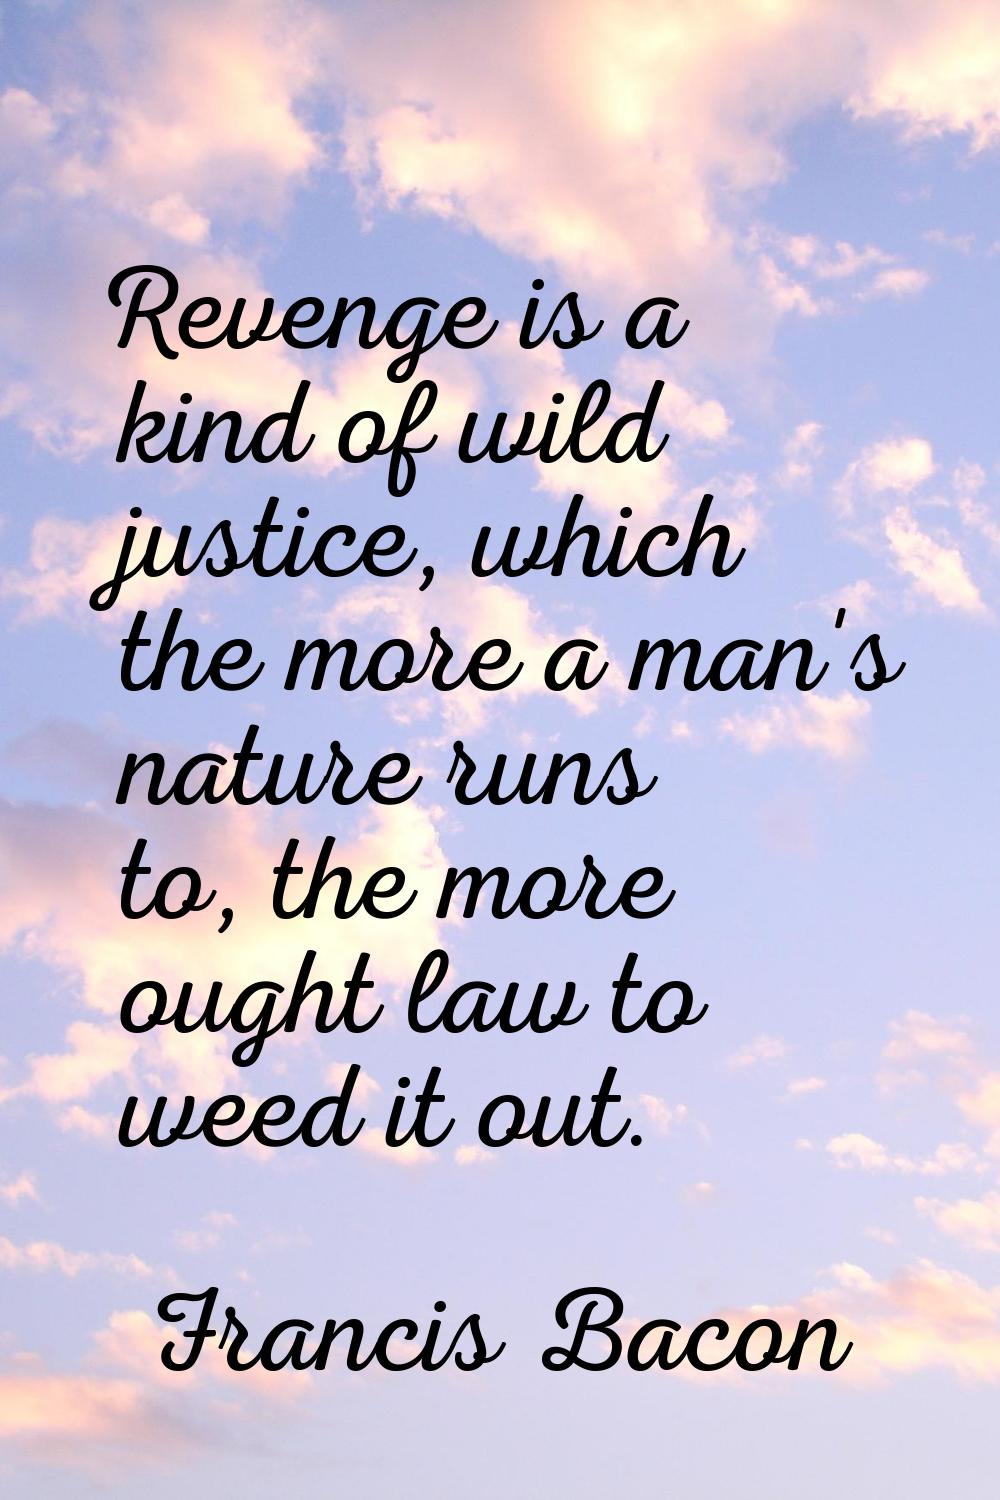 Revenge is a kind of wild justice, which the more a man's nature runs to, the more ought law to wee